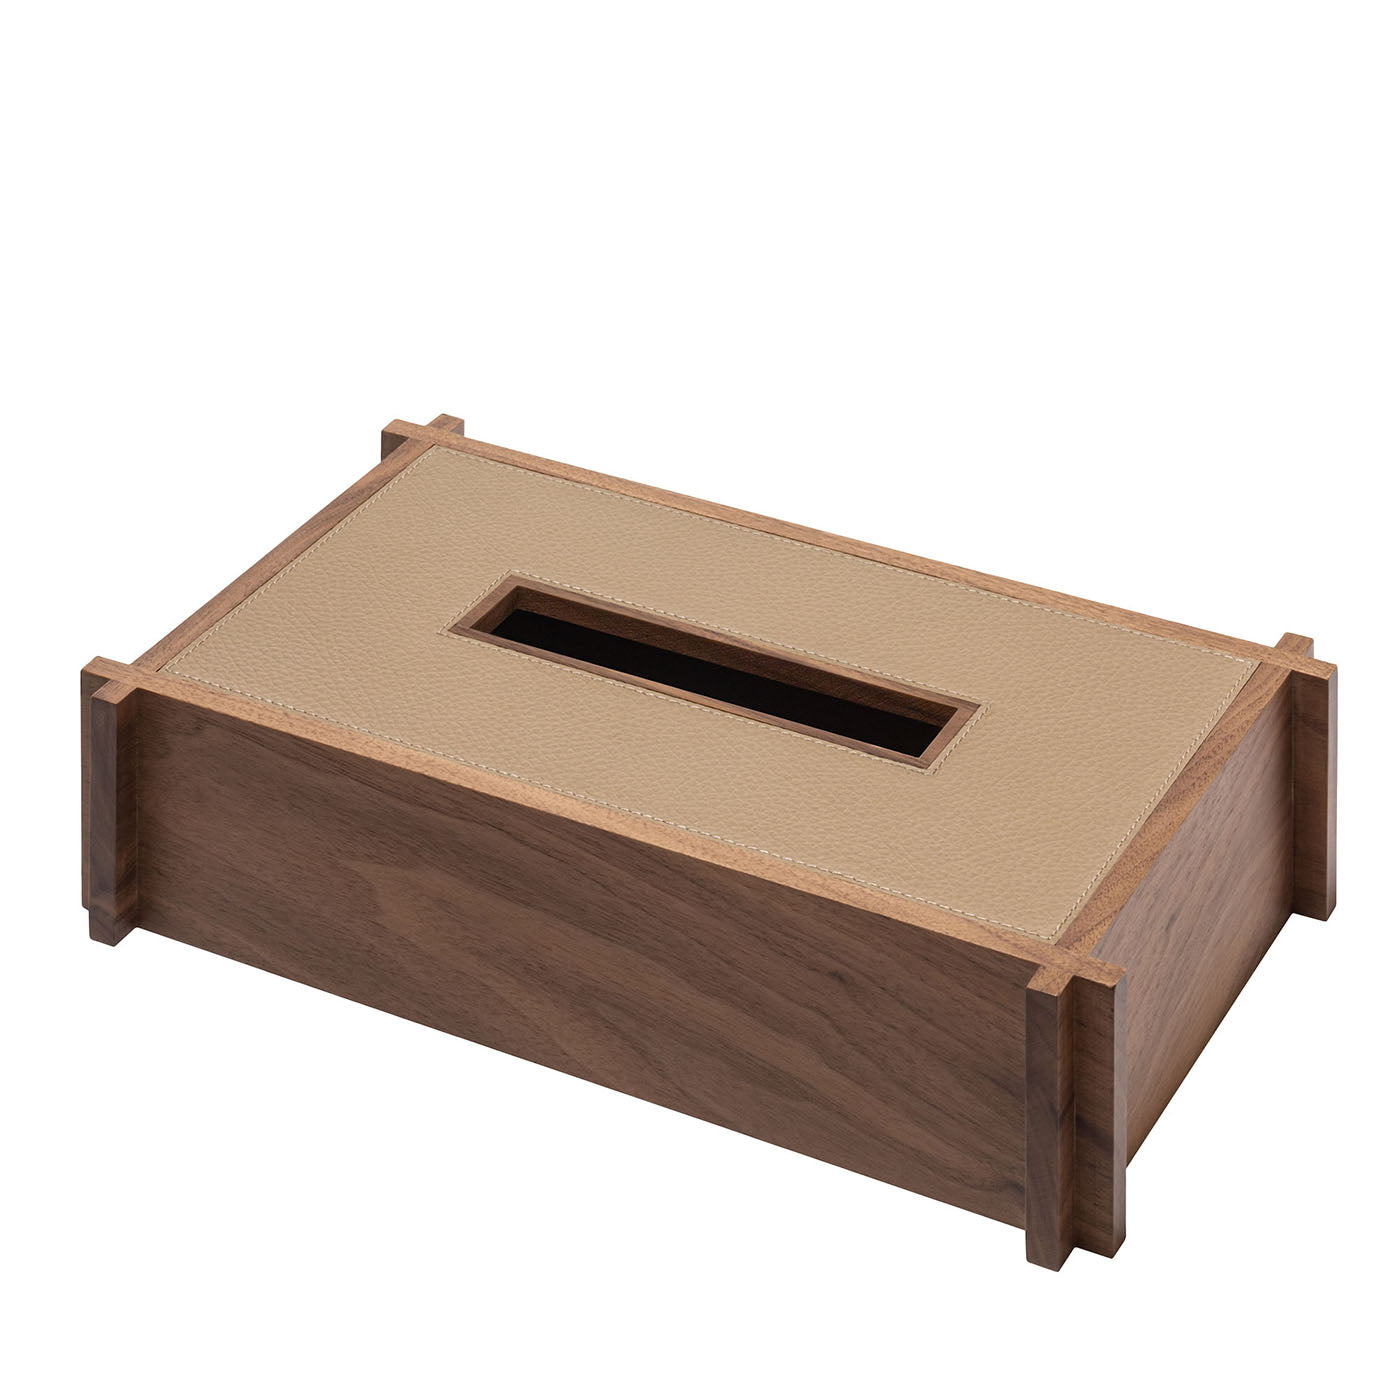 Structura Leather & Wood Light Brown Rectangular Tissue Holder  - Main view